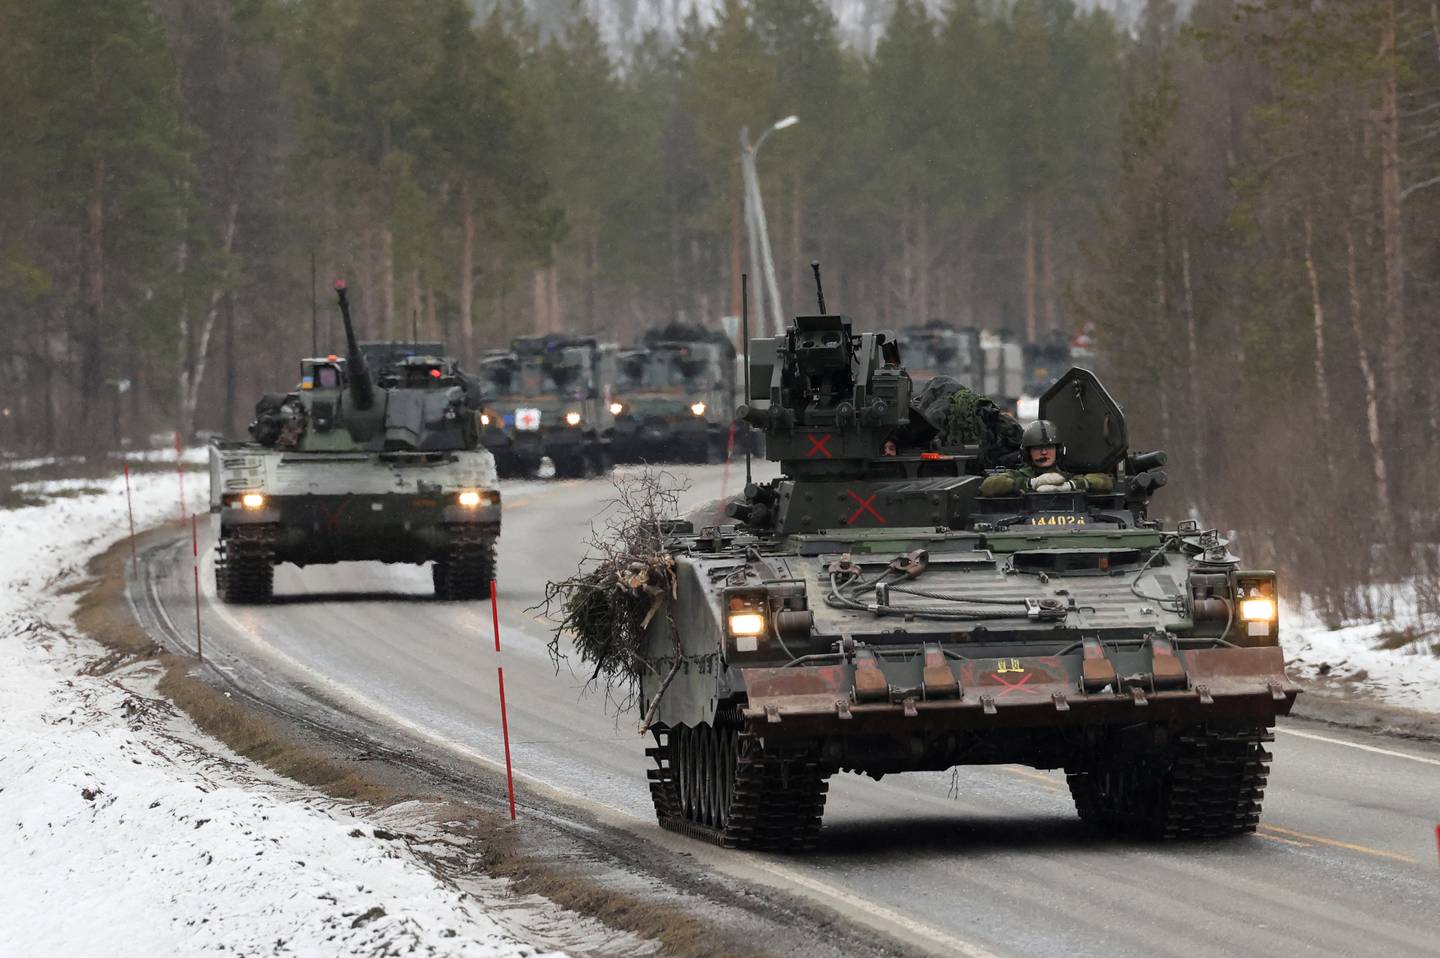 Swedish Army armoured vehicles and tanks participate in a military exercise called "Cold Response 2022", gathering around 30,000 troops from NATO member countries as well as Finland and Sweden, in Setermoen in the Arctic Circle, Norway. Reuters